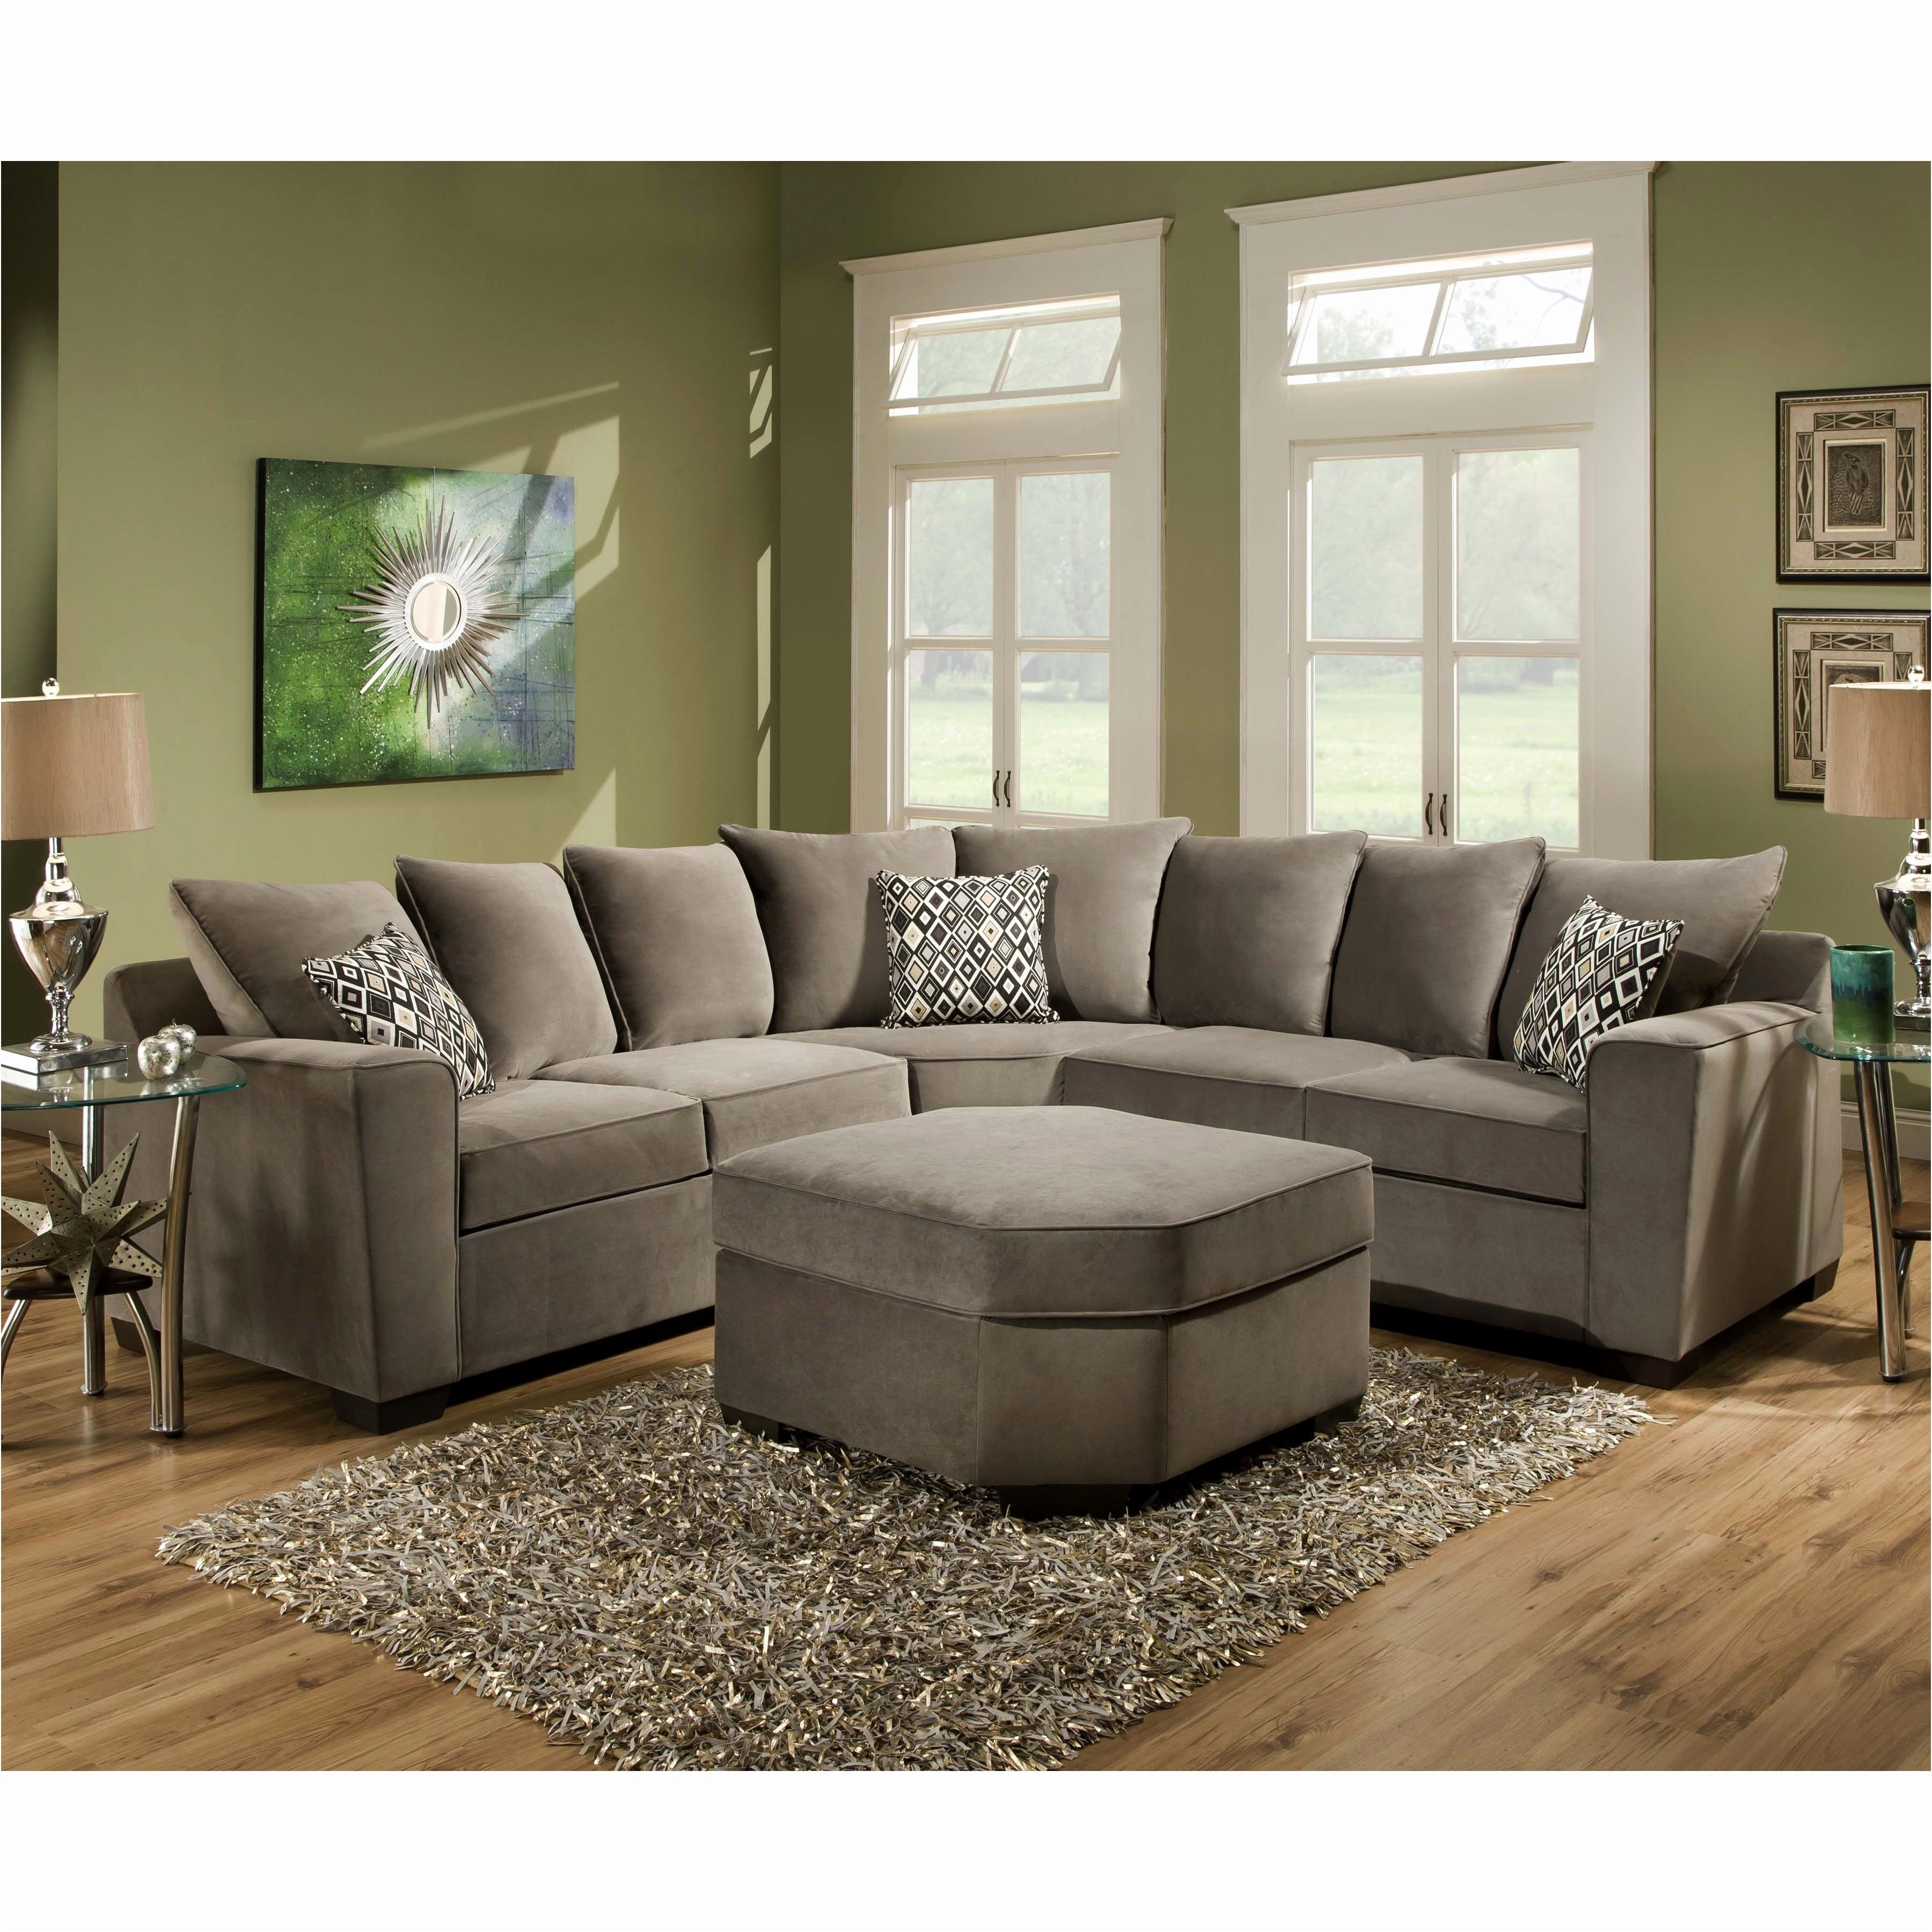 Elegant Cheap Sofas And Couches Inspirational – Intuisiblog Pertaining To Sears Sofas (Photo 6 of 10)